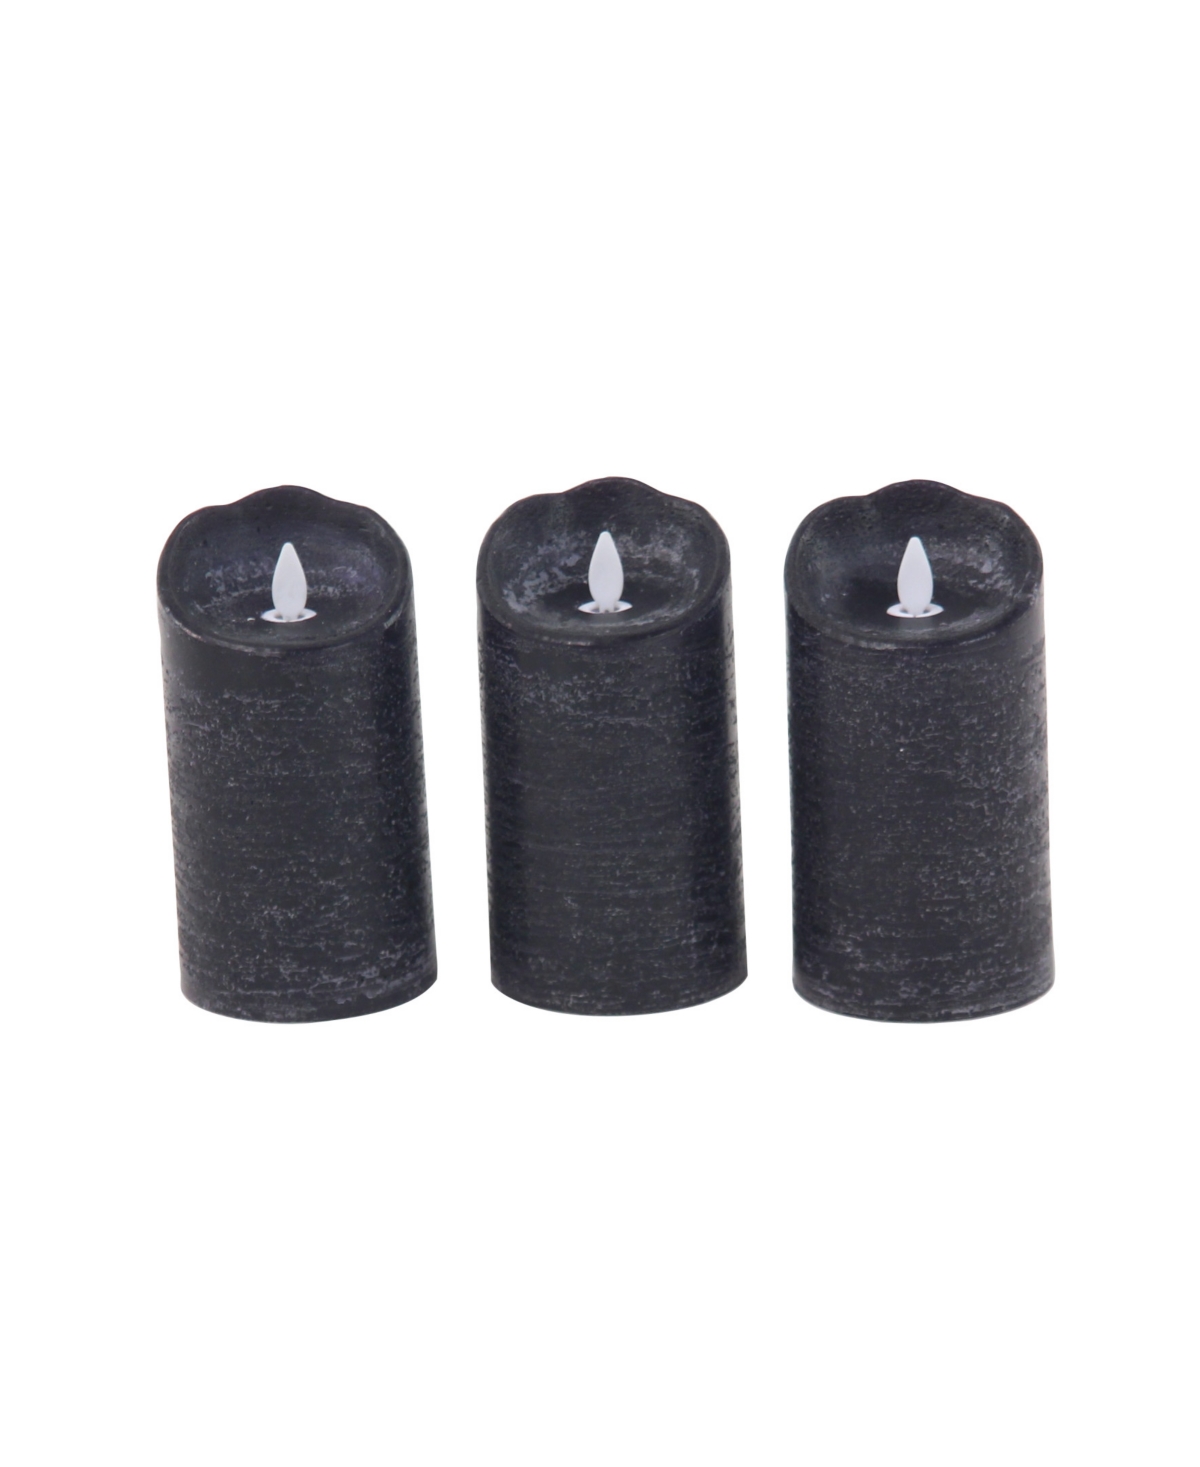 Traditional Wax Flameless Candle, Set of 3 - Black